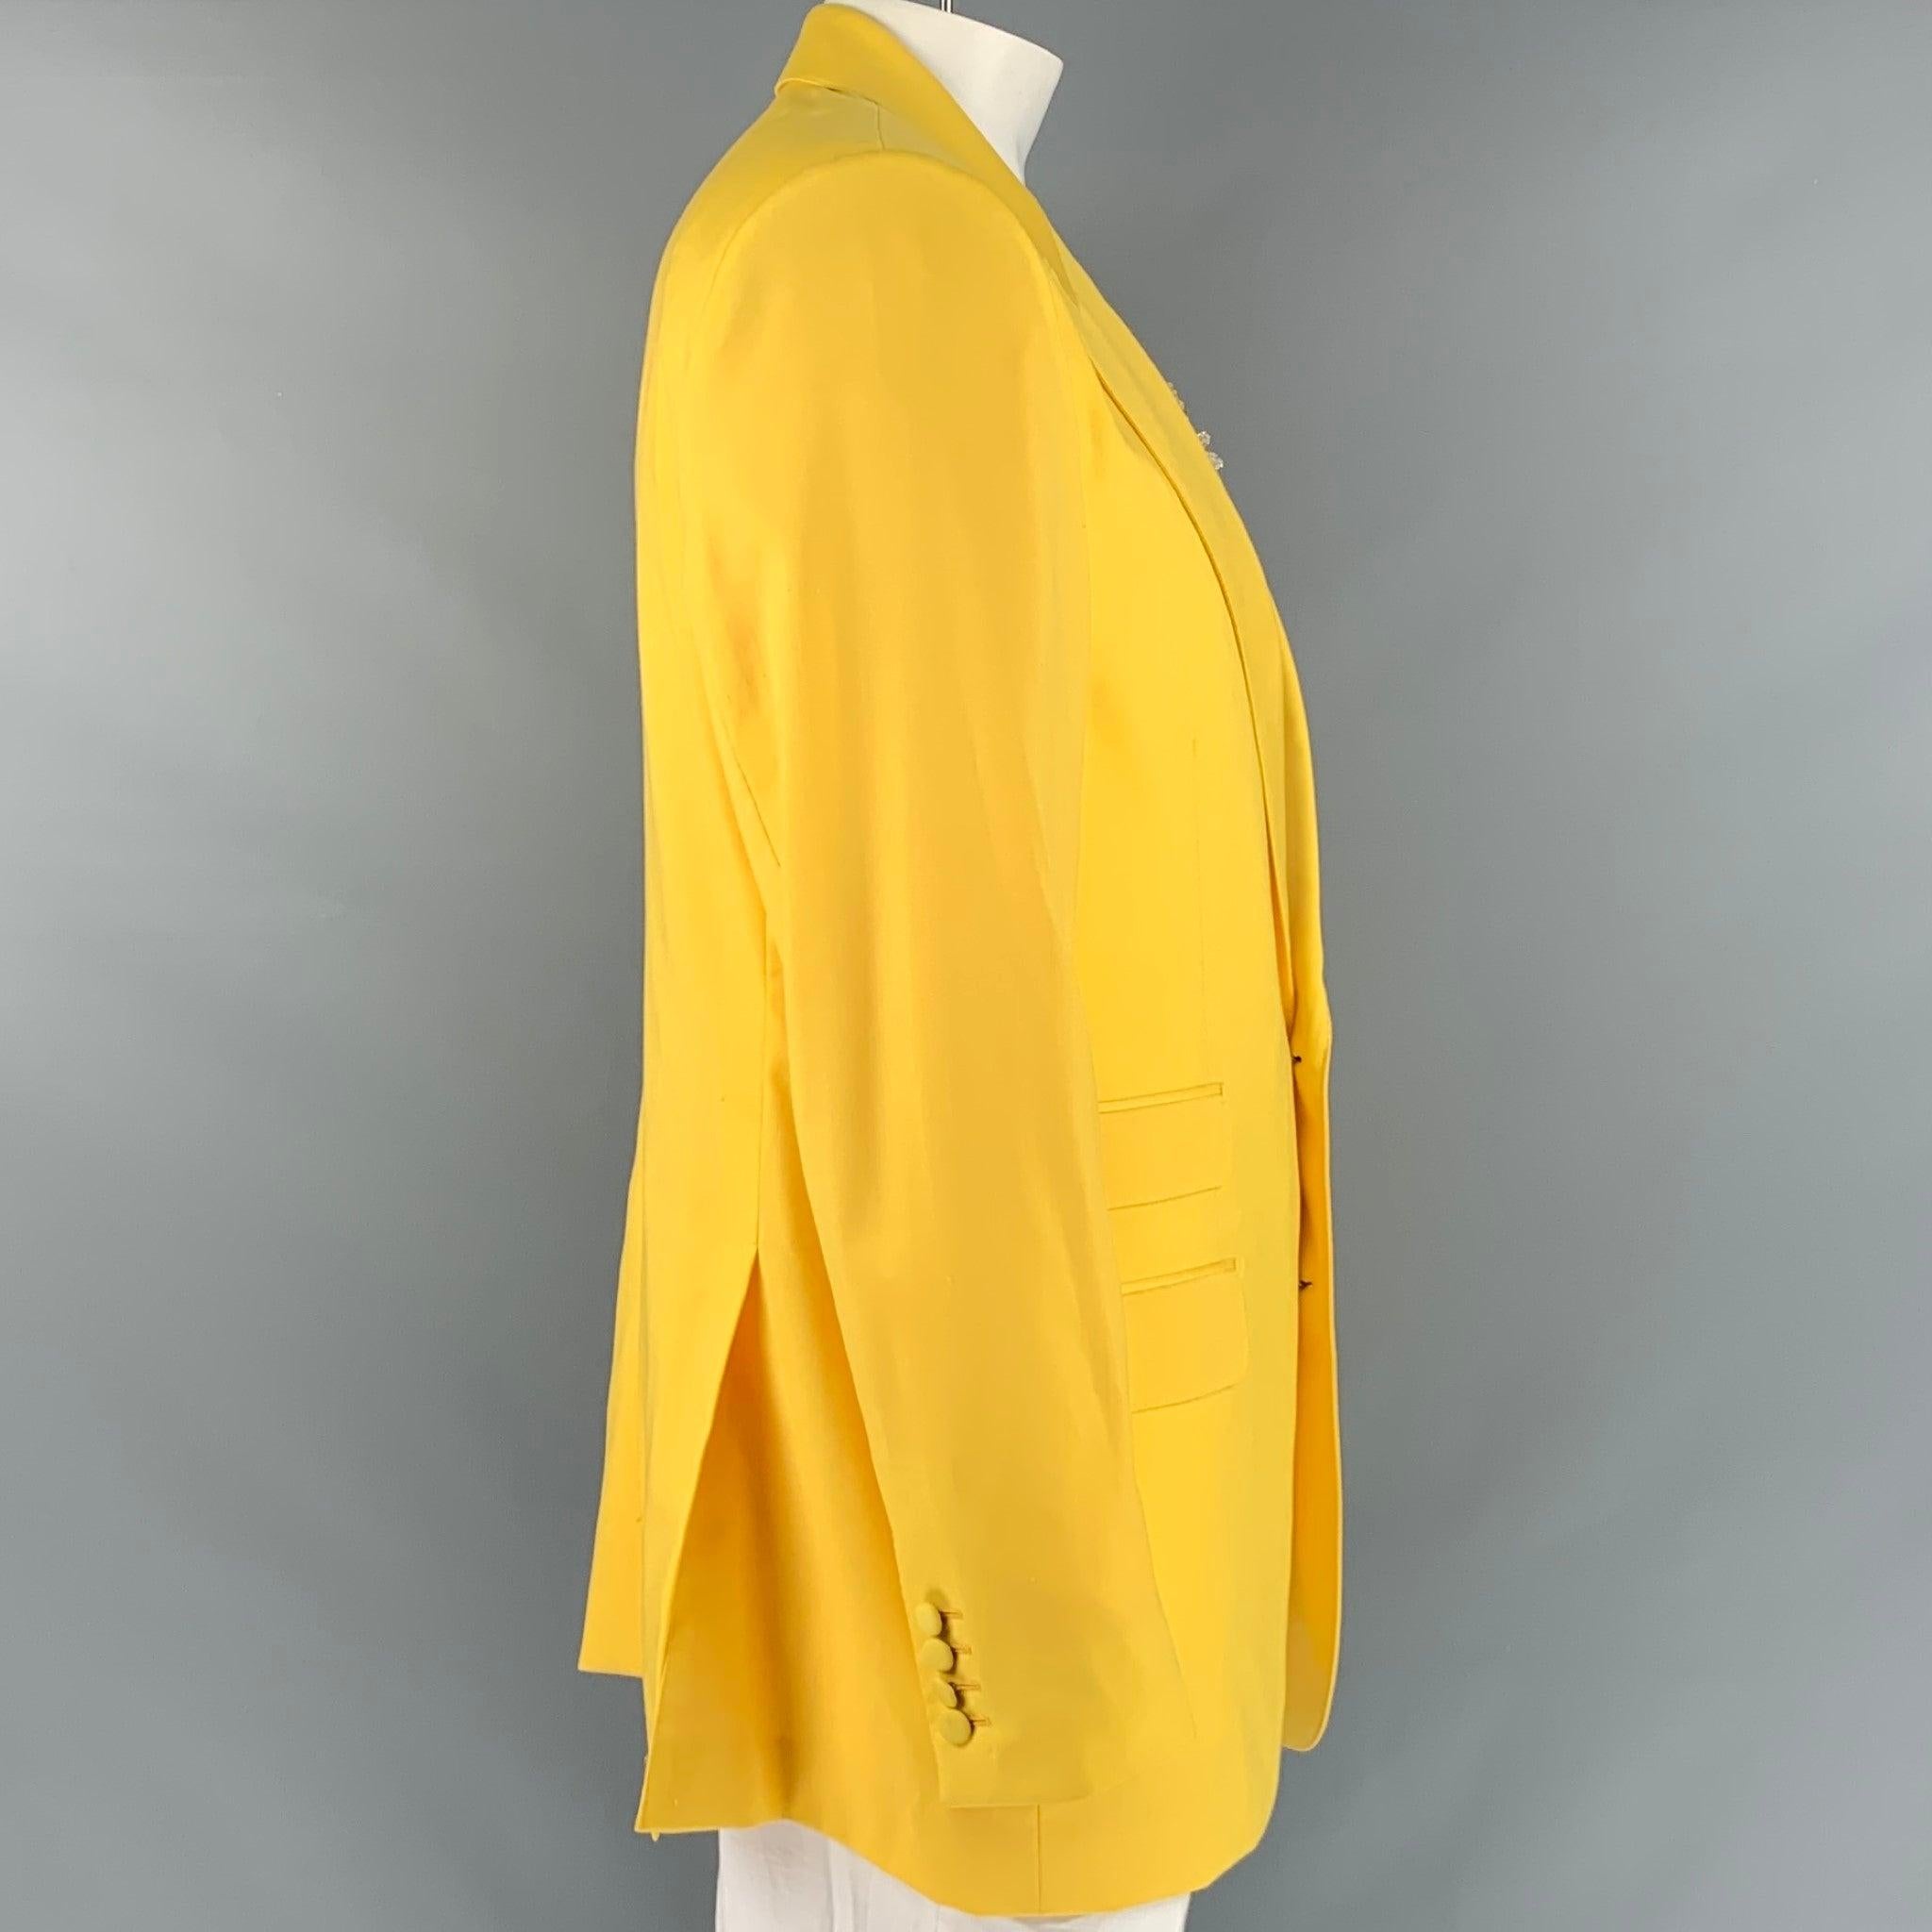 DOLCE & GABBANA sport coat in a yellow wool fabric featuring attached beaded lemon applique brooch, peak lapel, and a two button closure. Made in Italy.Very Good Pre-Owned Condition.  

Marked:   no size marked. 

Measurements: 
 
Shoulder: 18.5